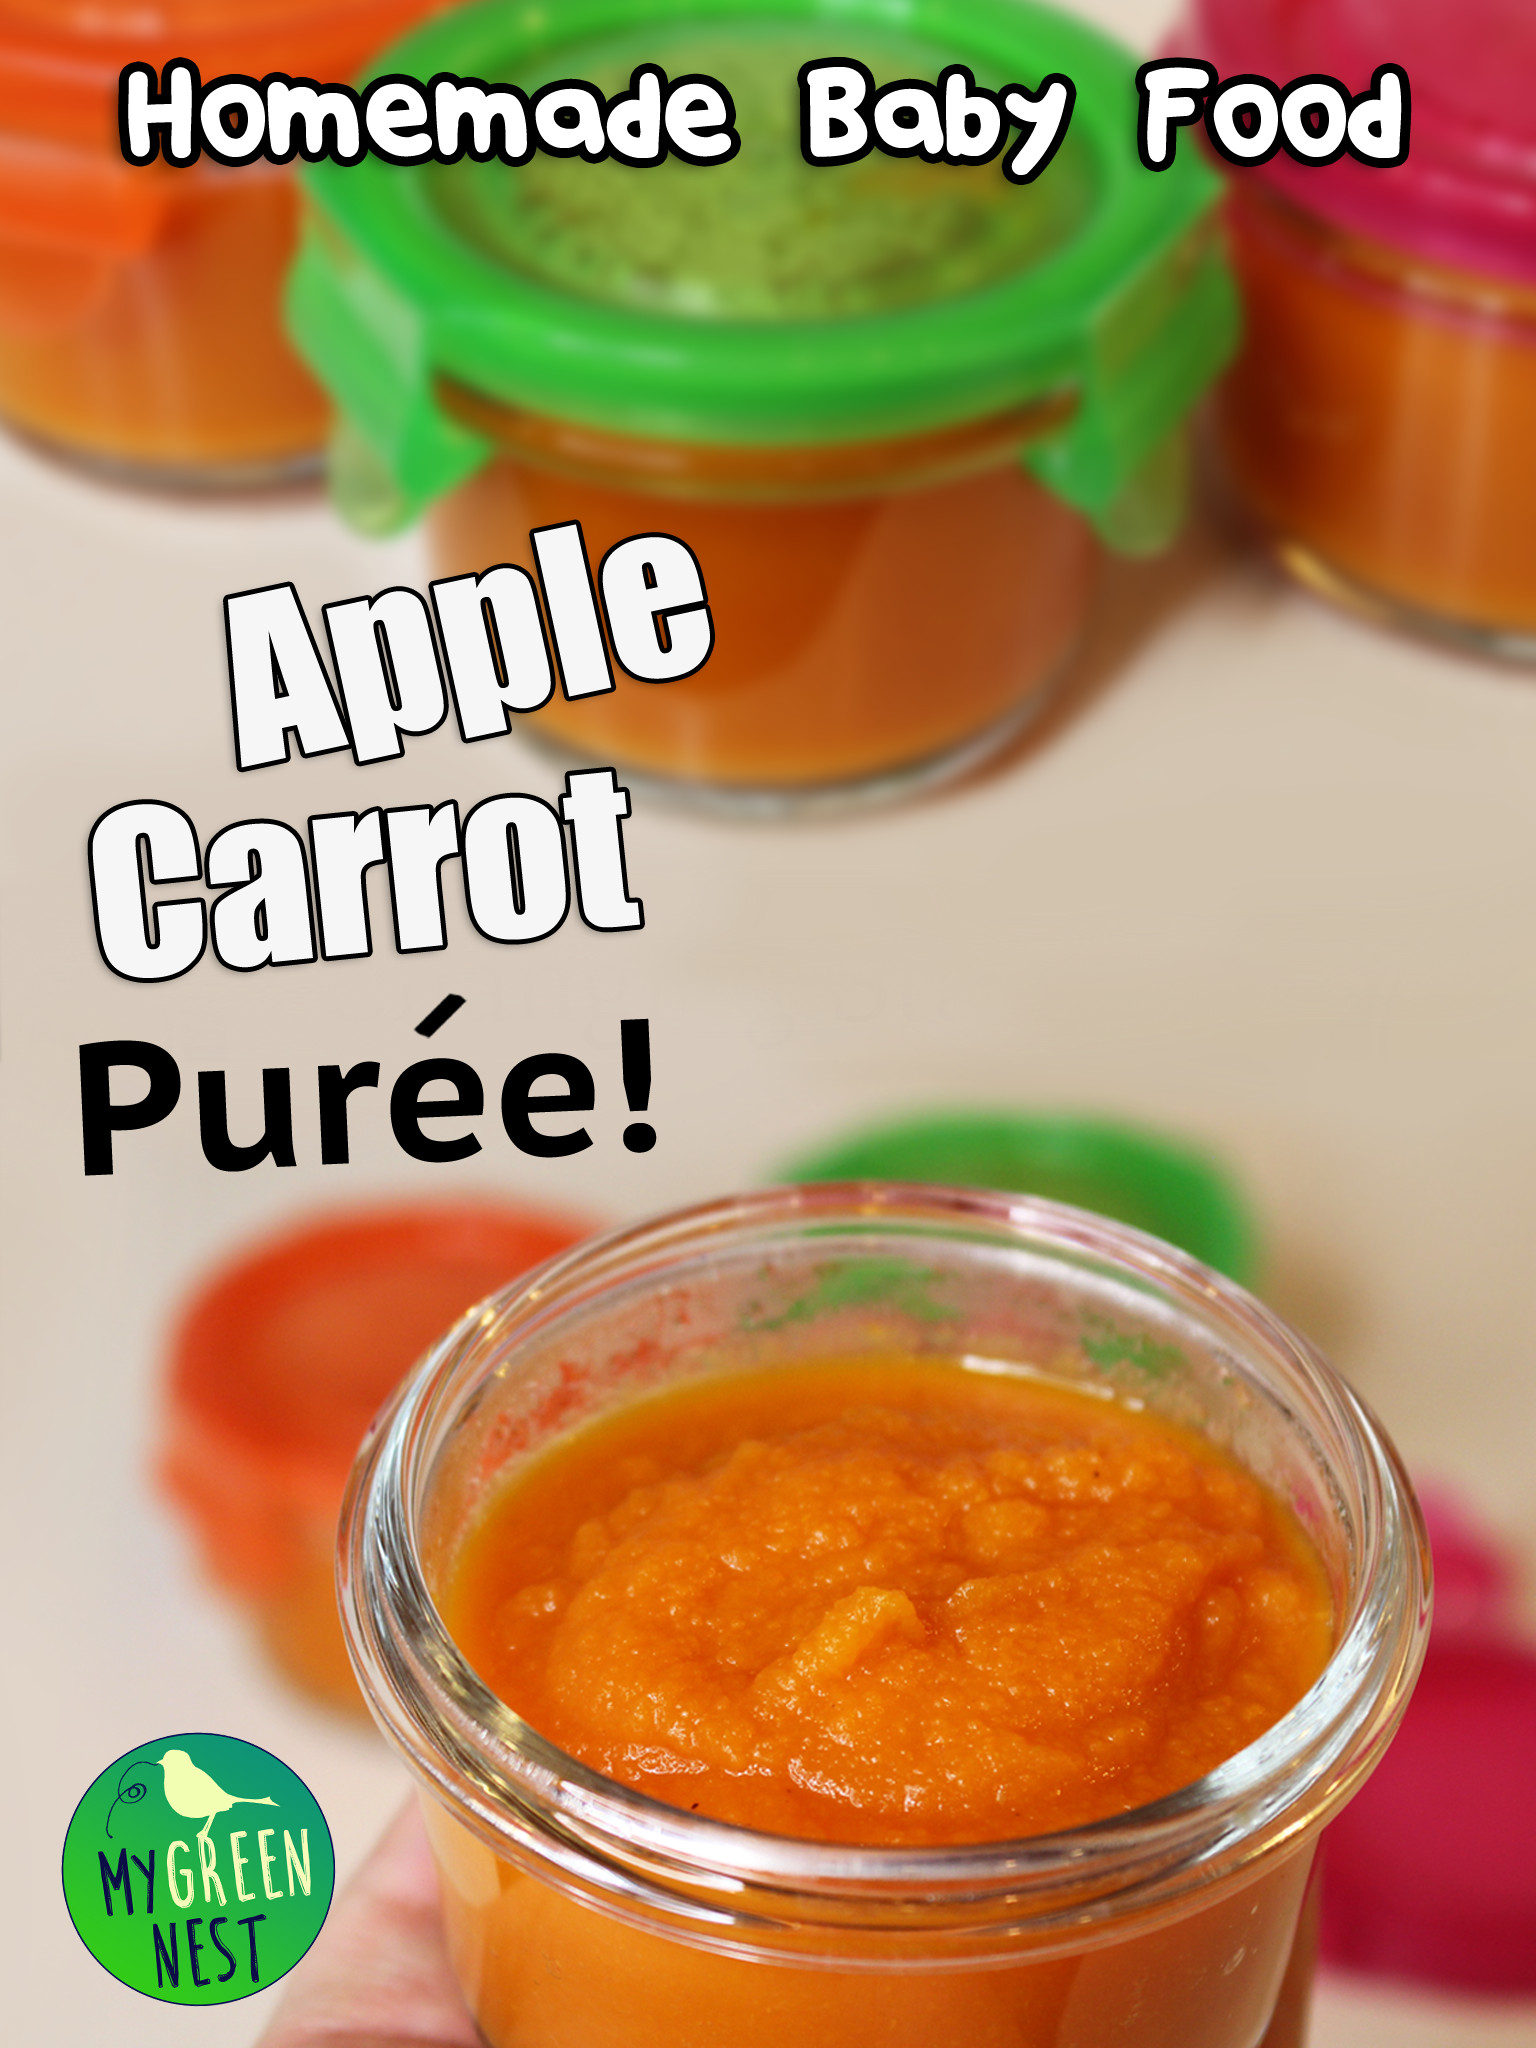 Pureeing Baby Food Recipes
 Homemade Baby Food Recipes Apple Carrot Puree